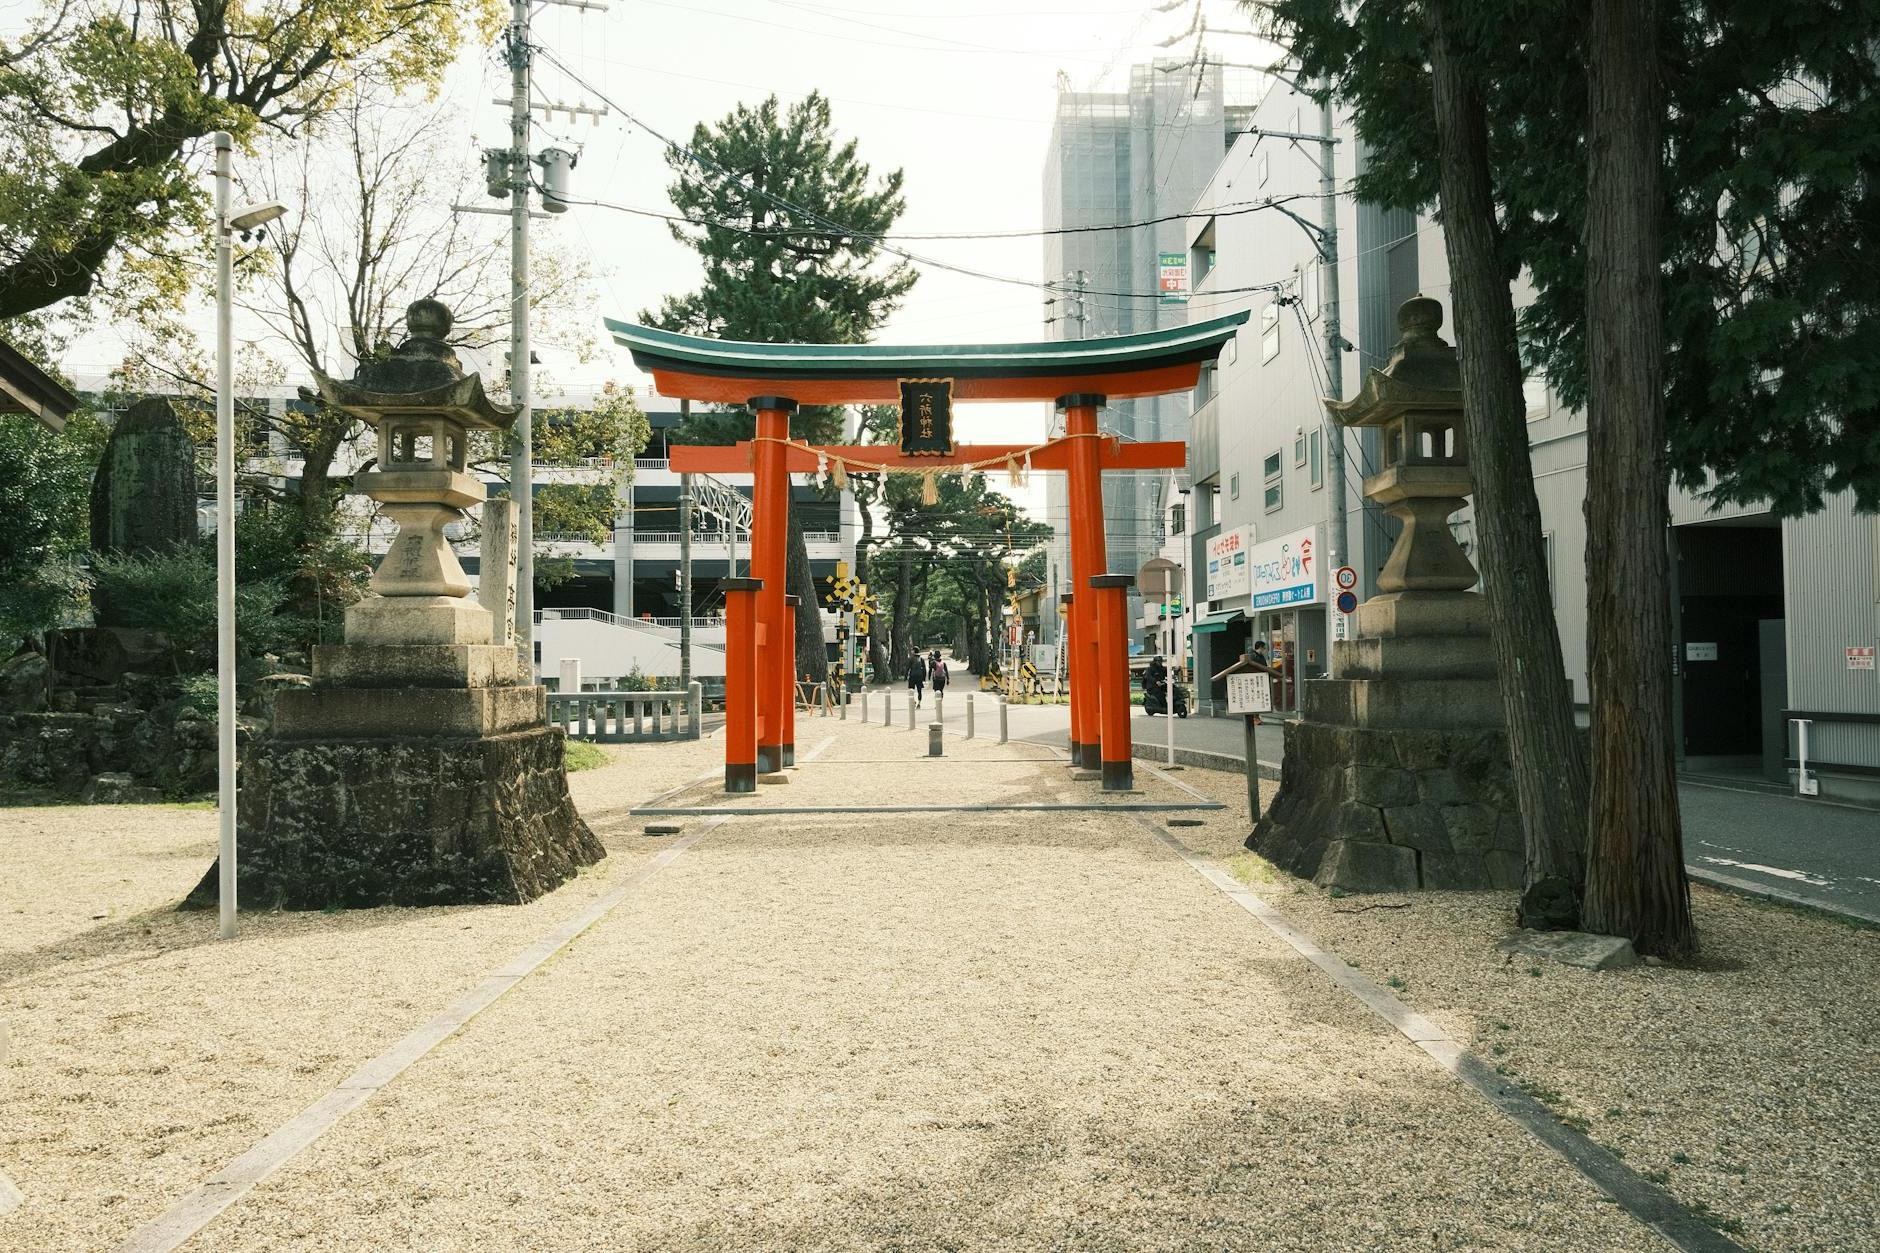 Traditional Gate in City